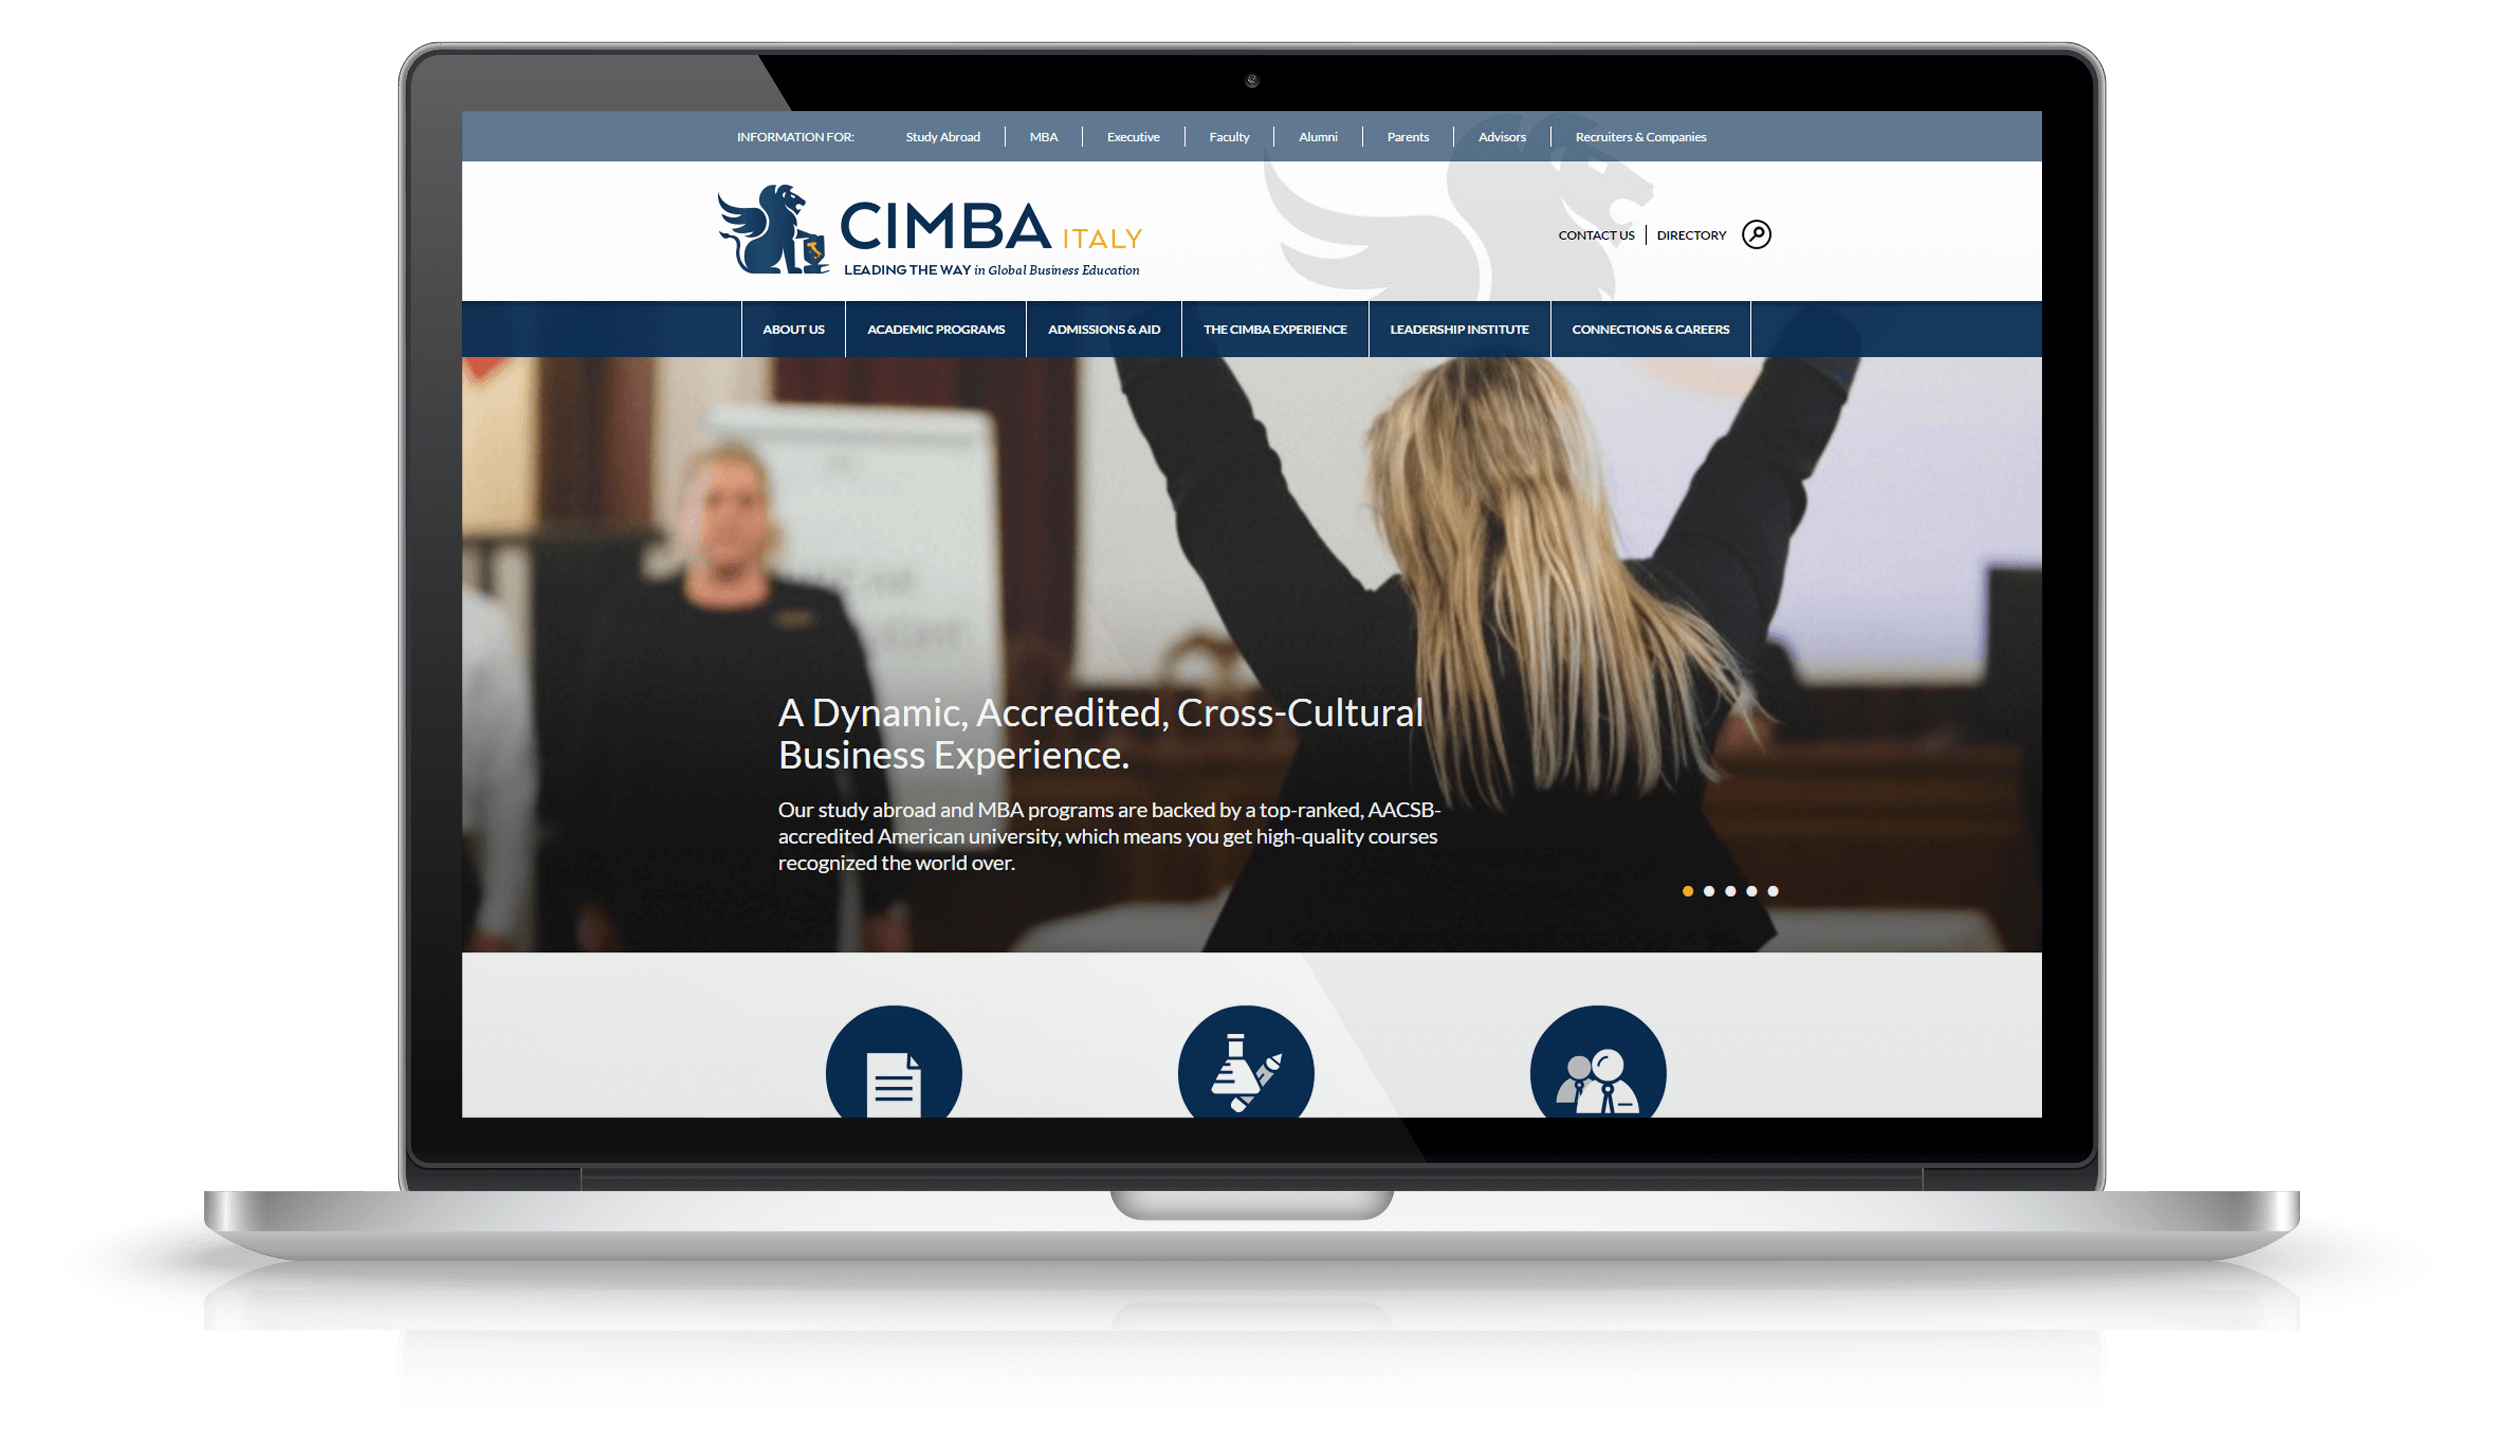 Pixelnation Project: CIMBA Italy Website - Home Page